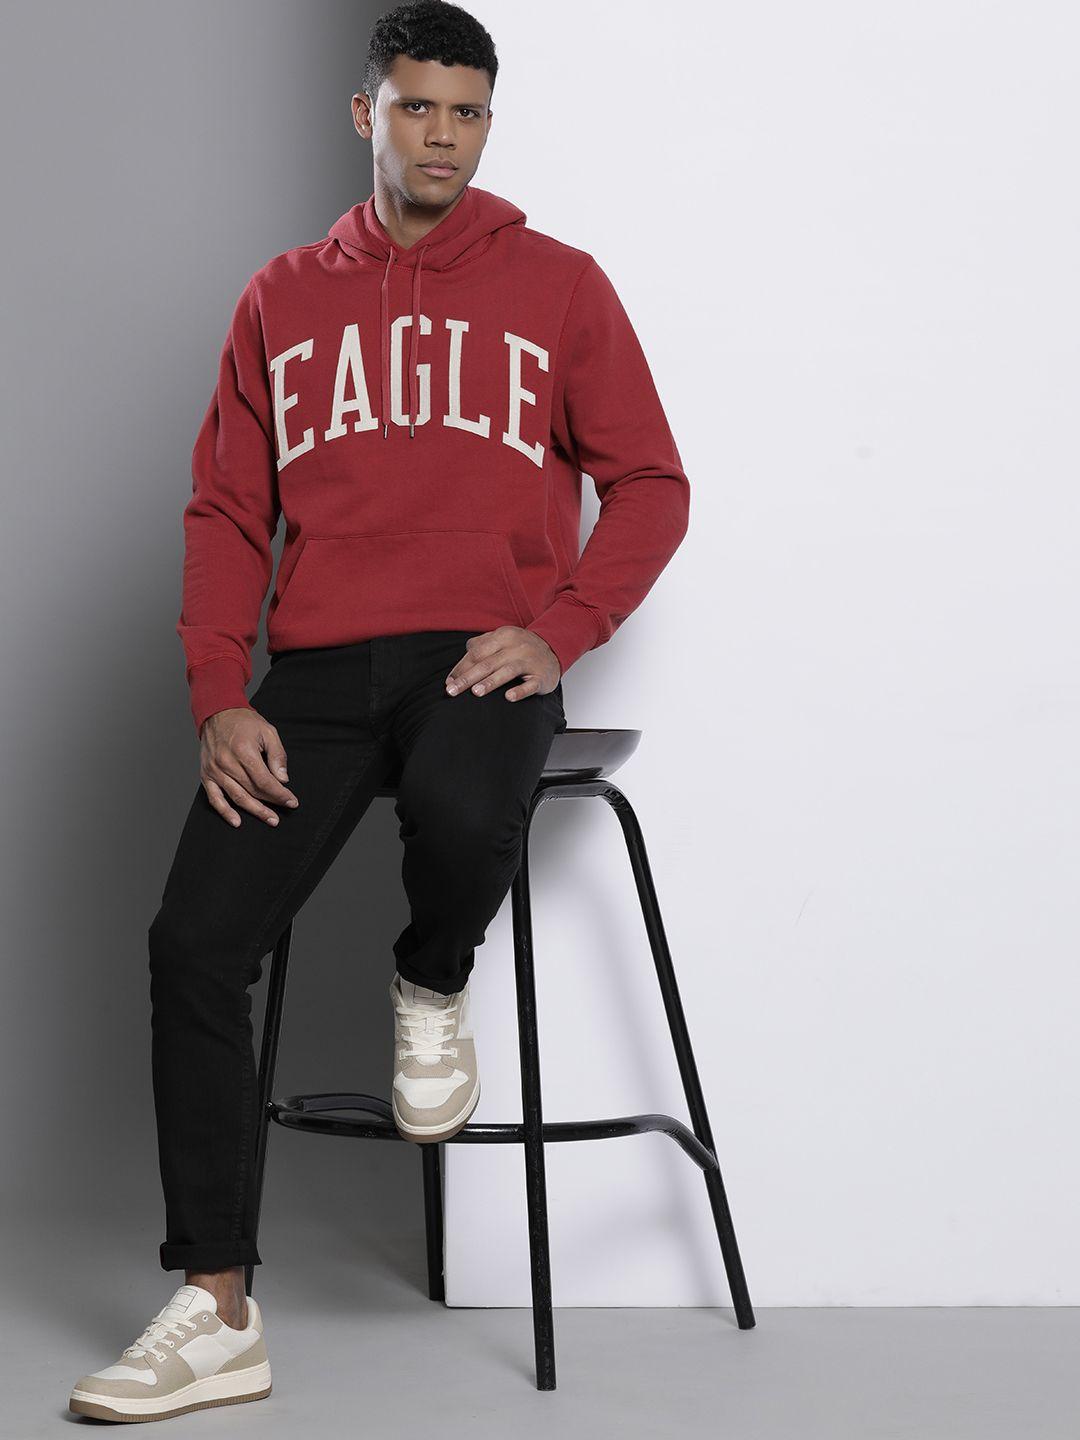 american eagle outfitters brand logo applique hooded sweatshirt